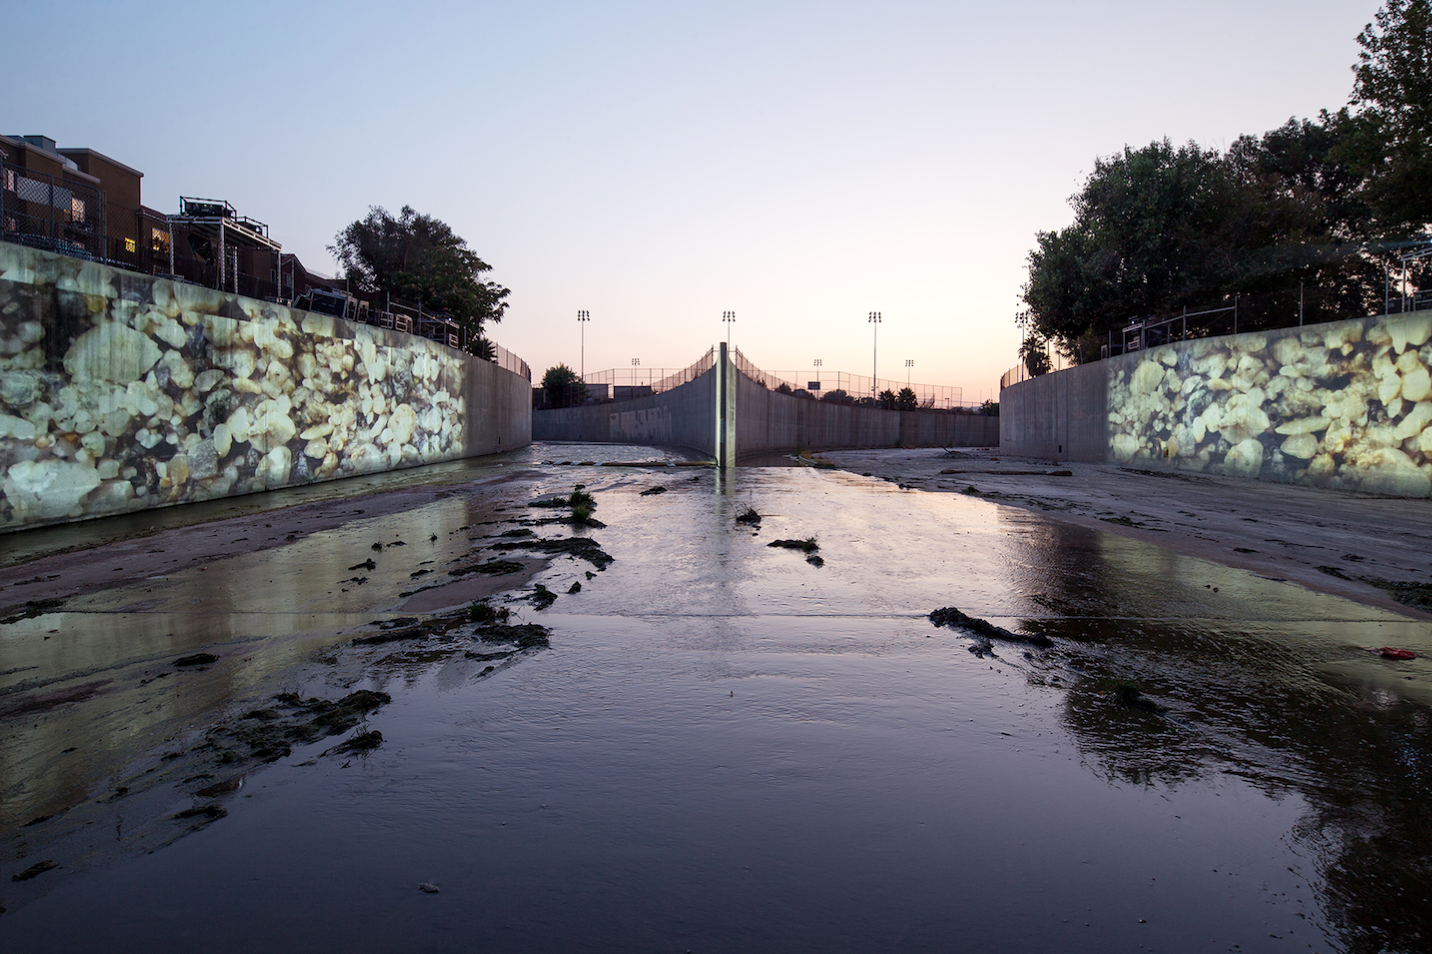 UnderLA 2016 
Refik Anadol and Peggy Weil  
Video Projection - Los Angeles Aquifer projected onto the banks of the Los Angeles River. Commissioned by the City of Los Angeles for CURRENT:LA WATER, Origin of LA River, Canoga Park, LA  Photo: Panic Studio LA, courtesy of City of Los Angeles